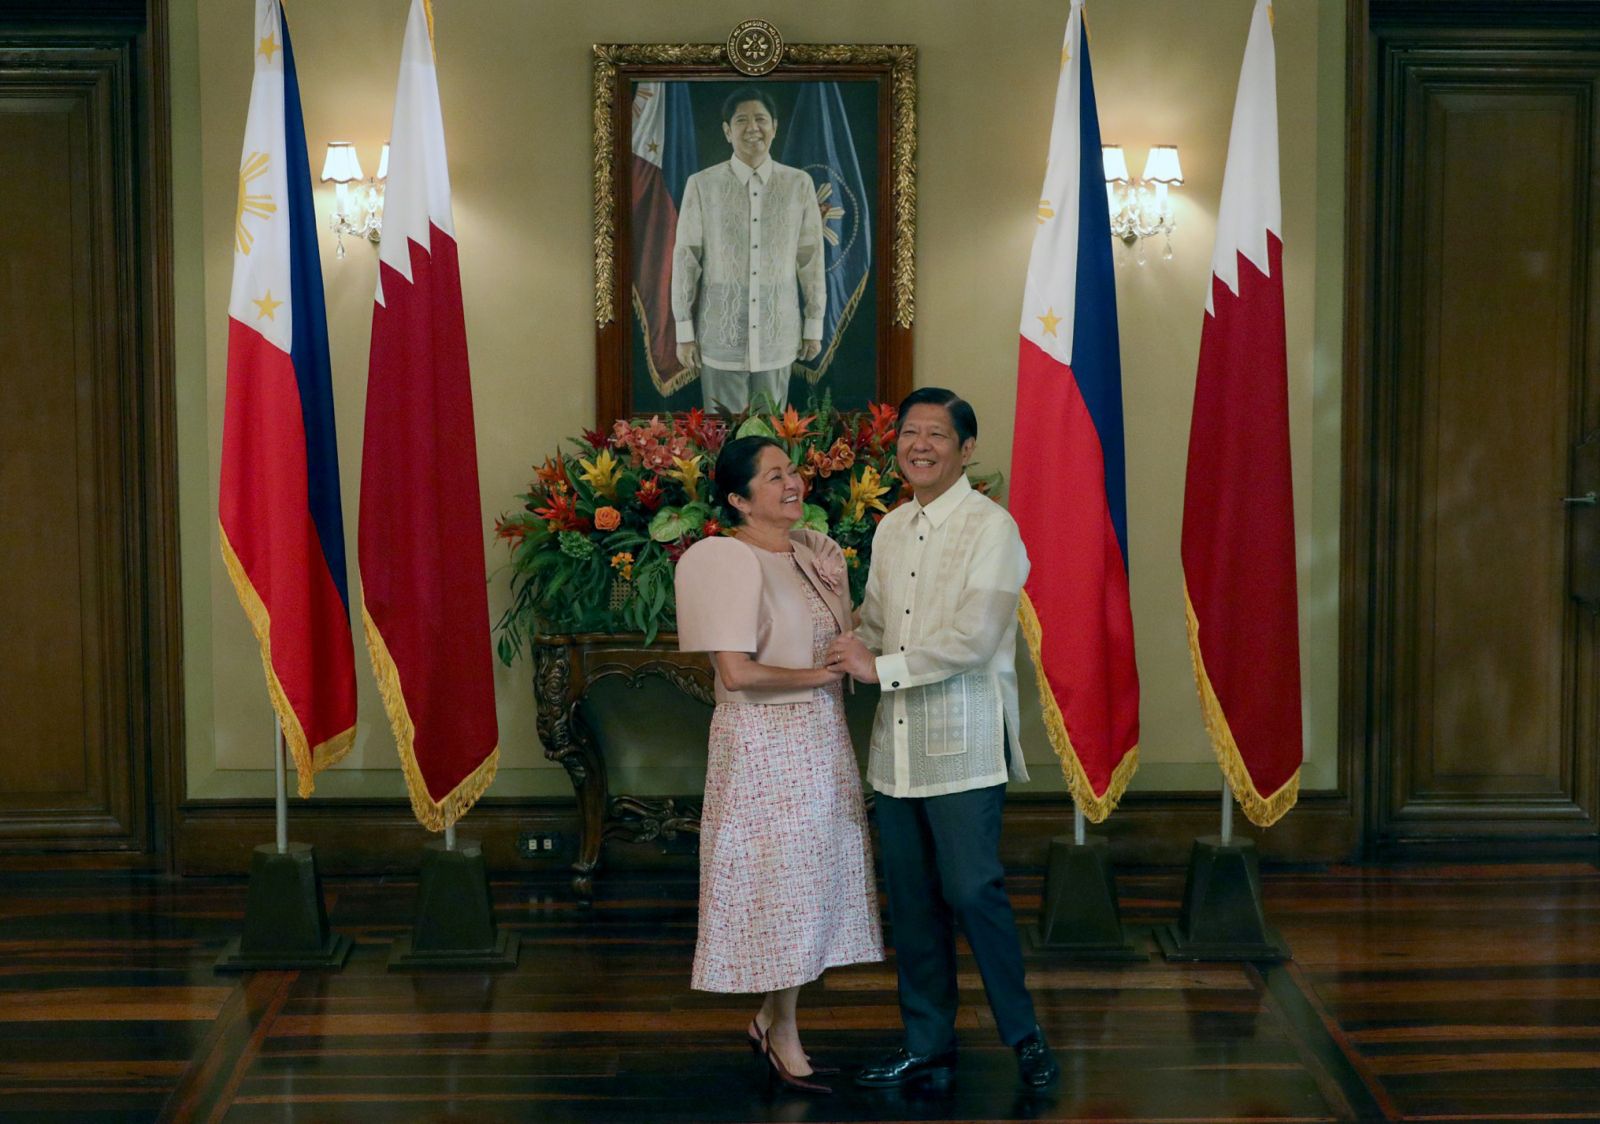 Marcos greets on Mothers’ Day wife, mothers, fathers who take care of kids